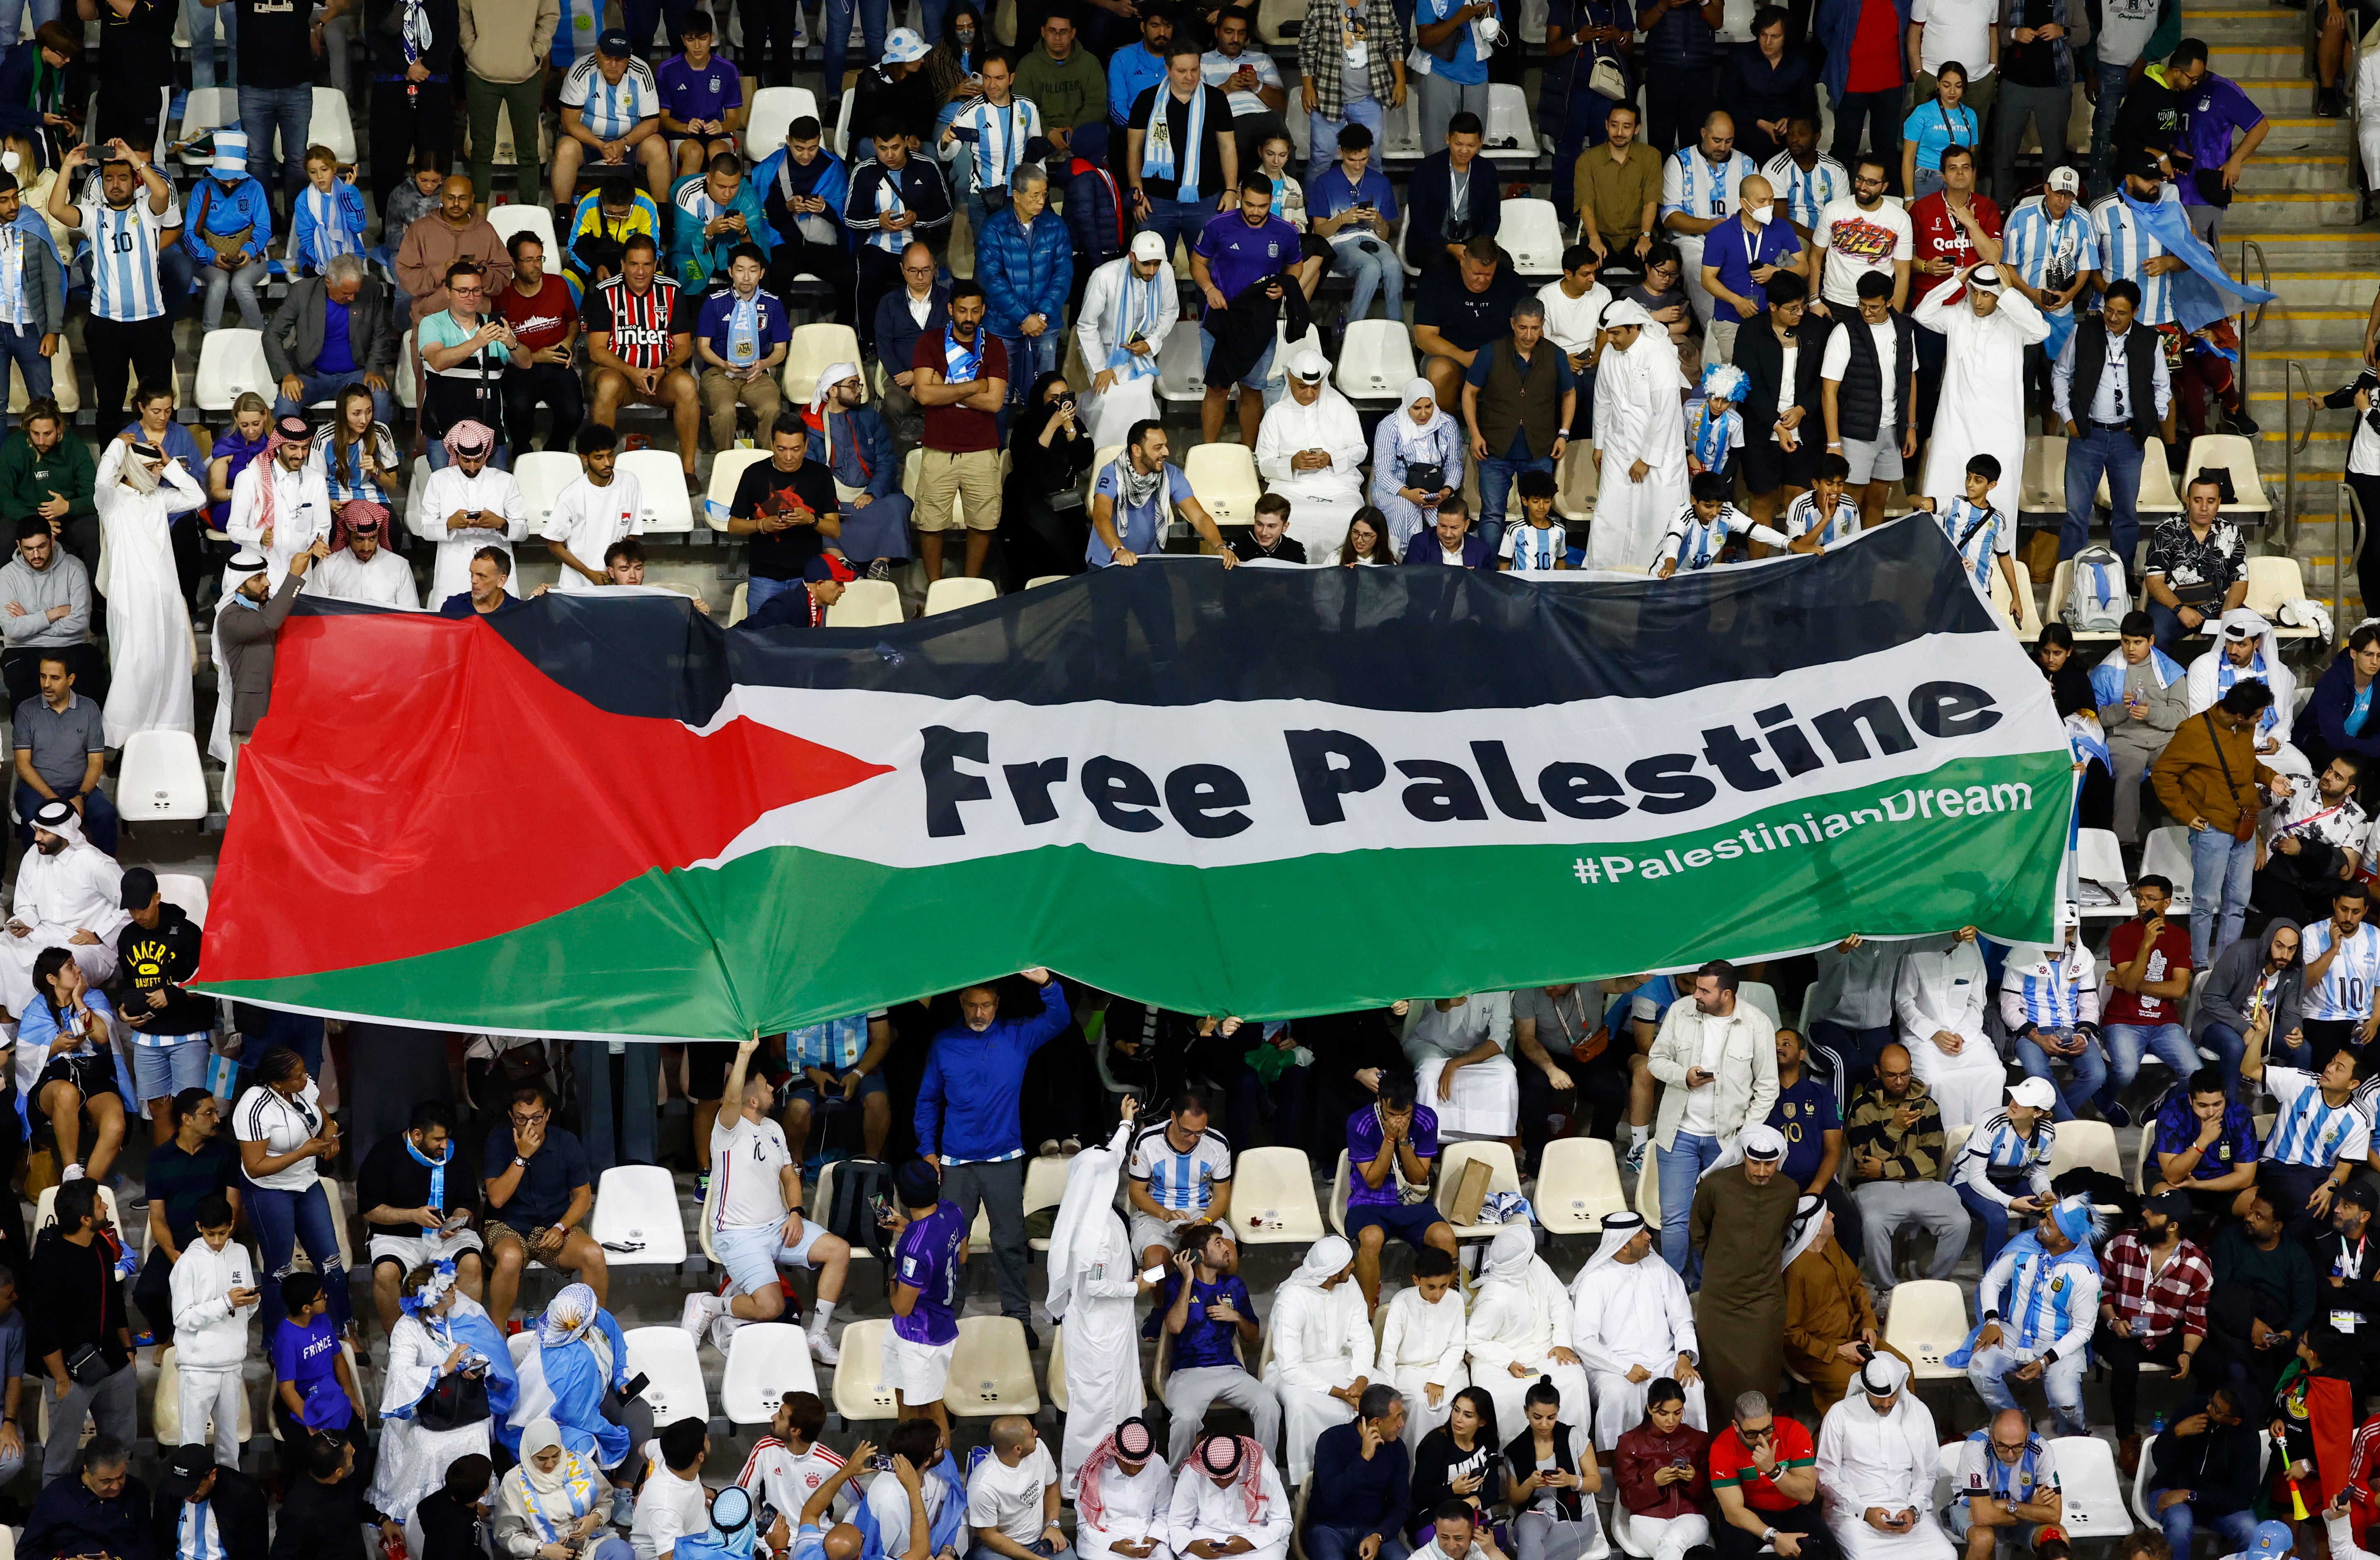 Fans display a flag reading ‘Free Palestine’ in the stands